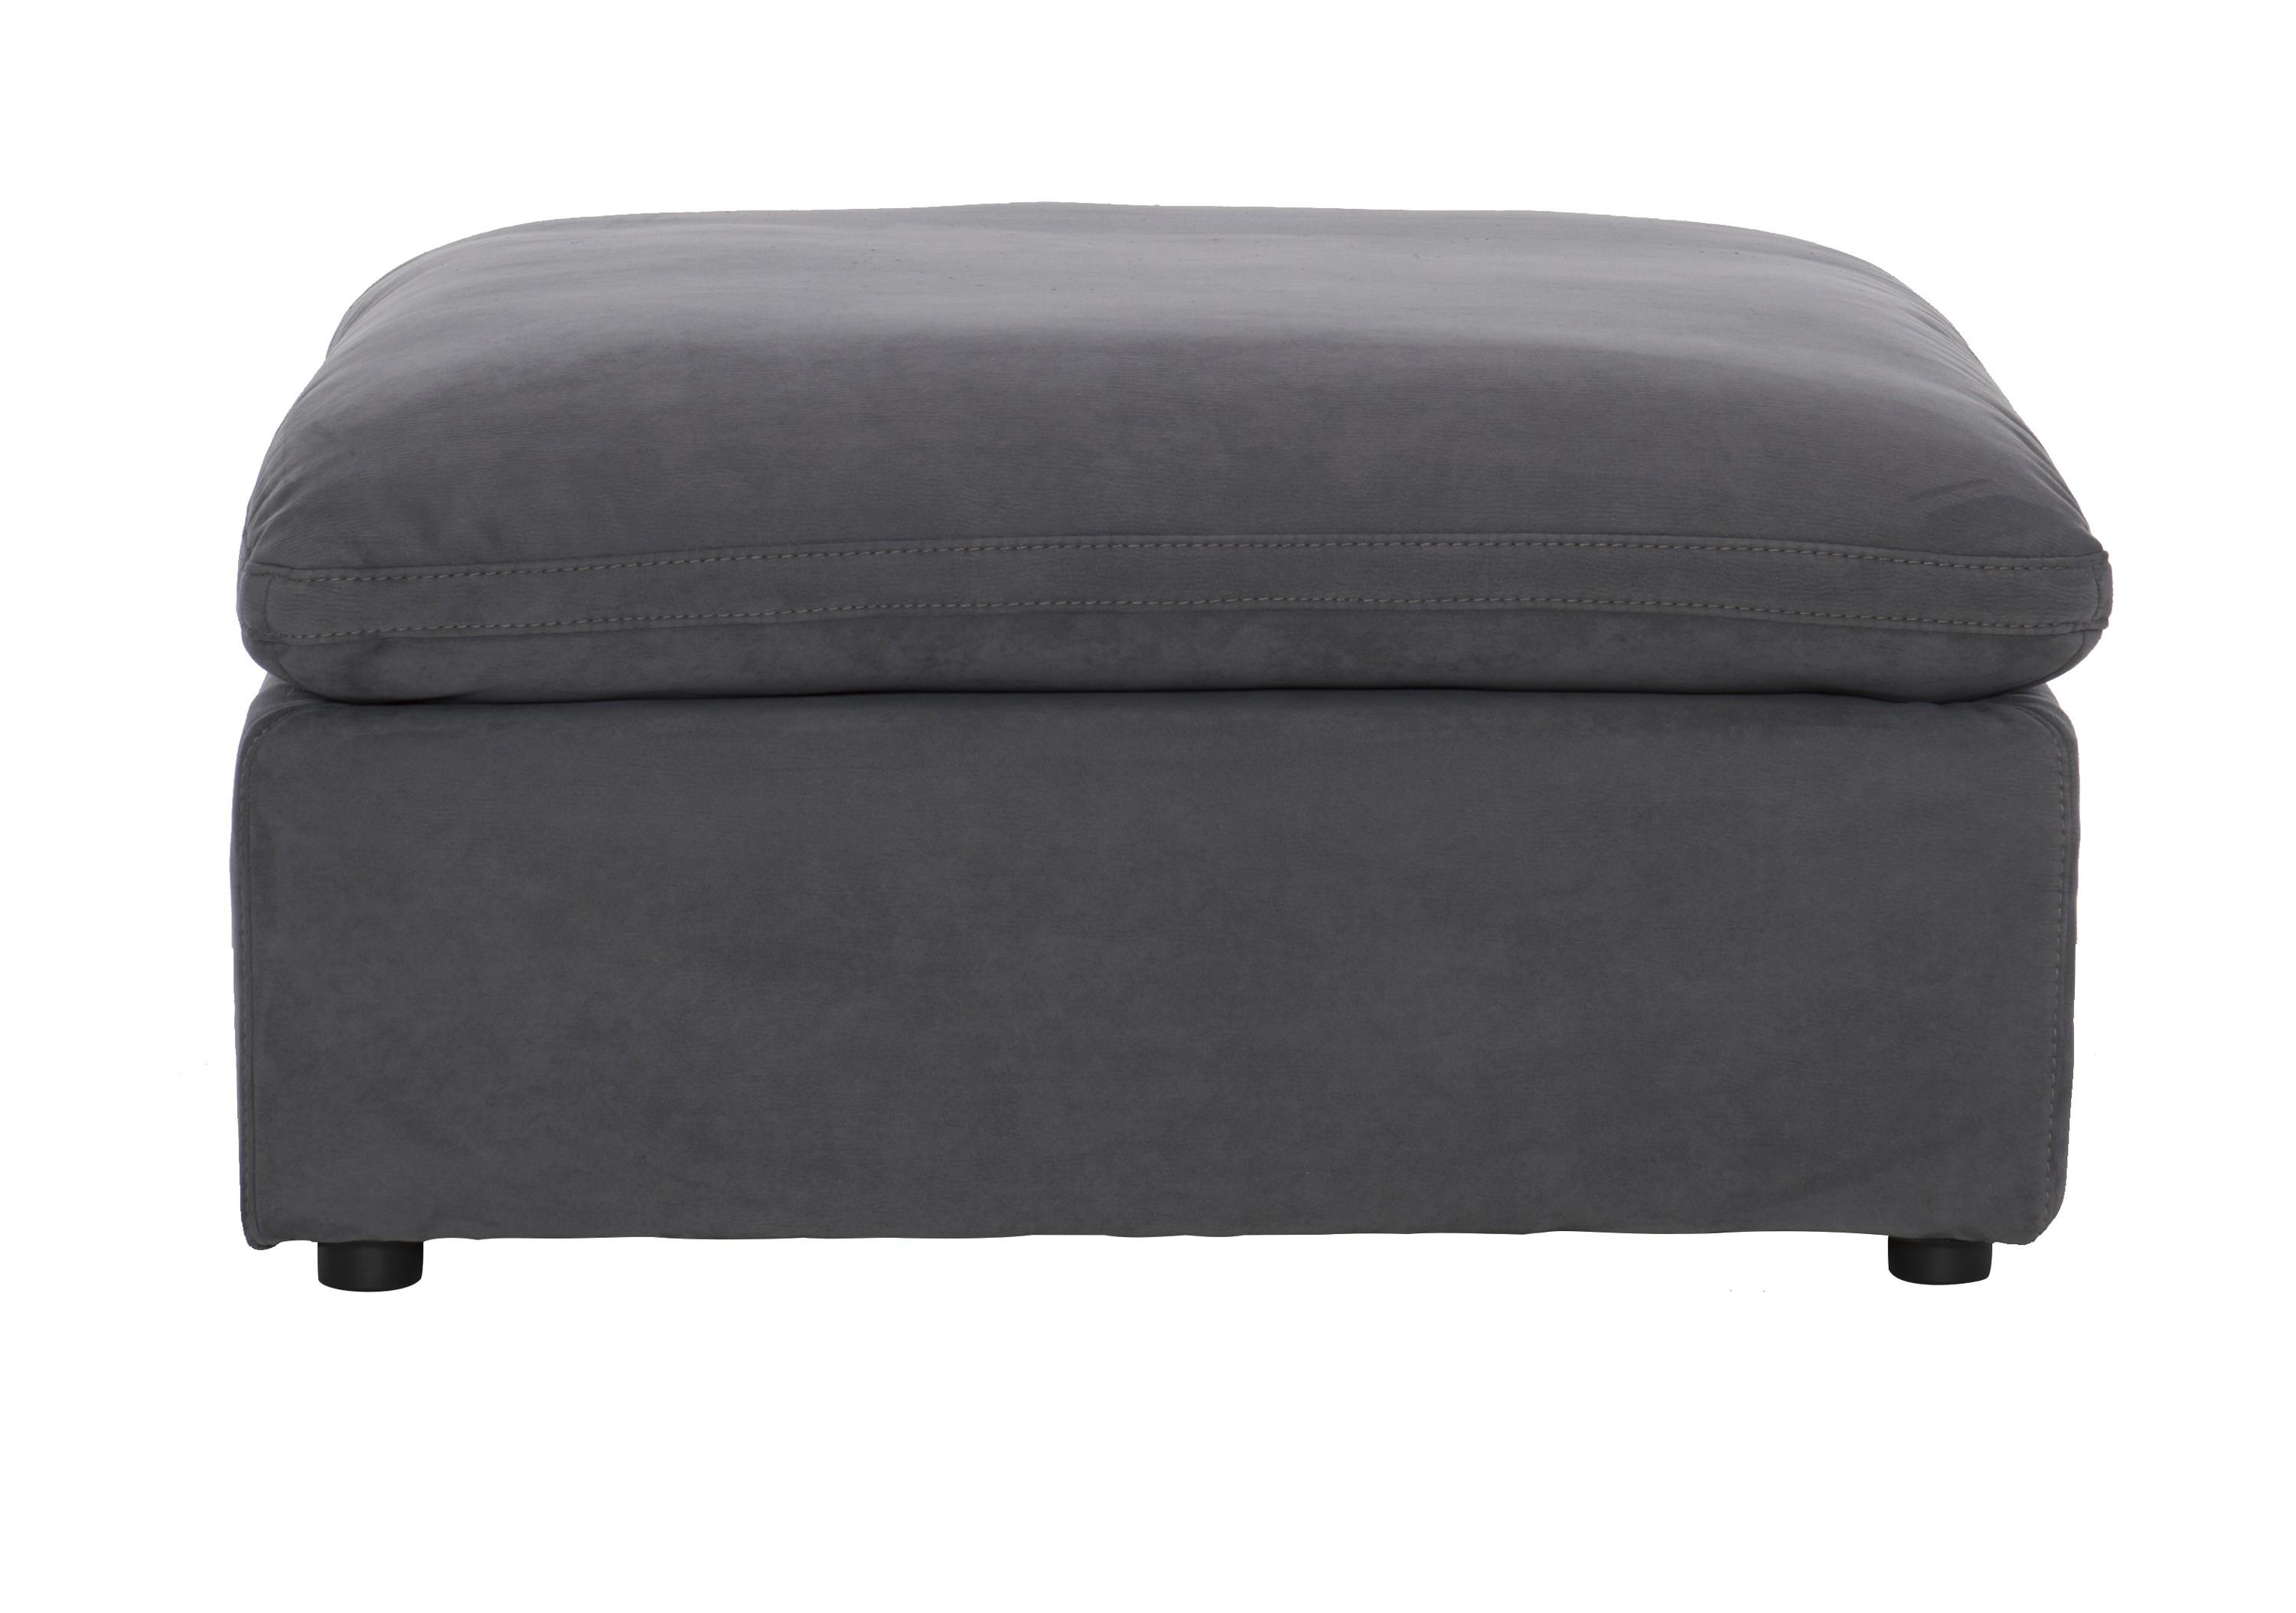 Transitional Ottoman 9546GY-4 Guthrie 9546GY-4 in Gray Microfiber